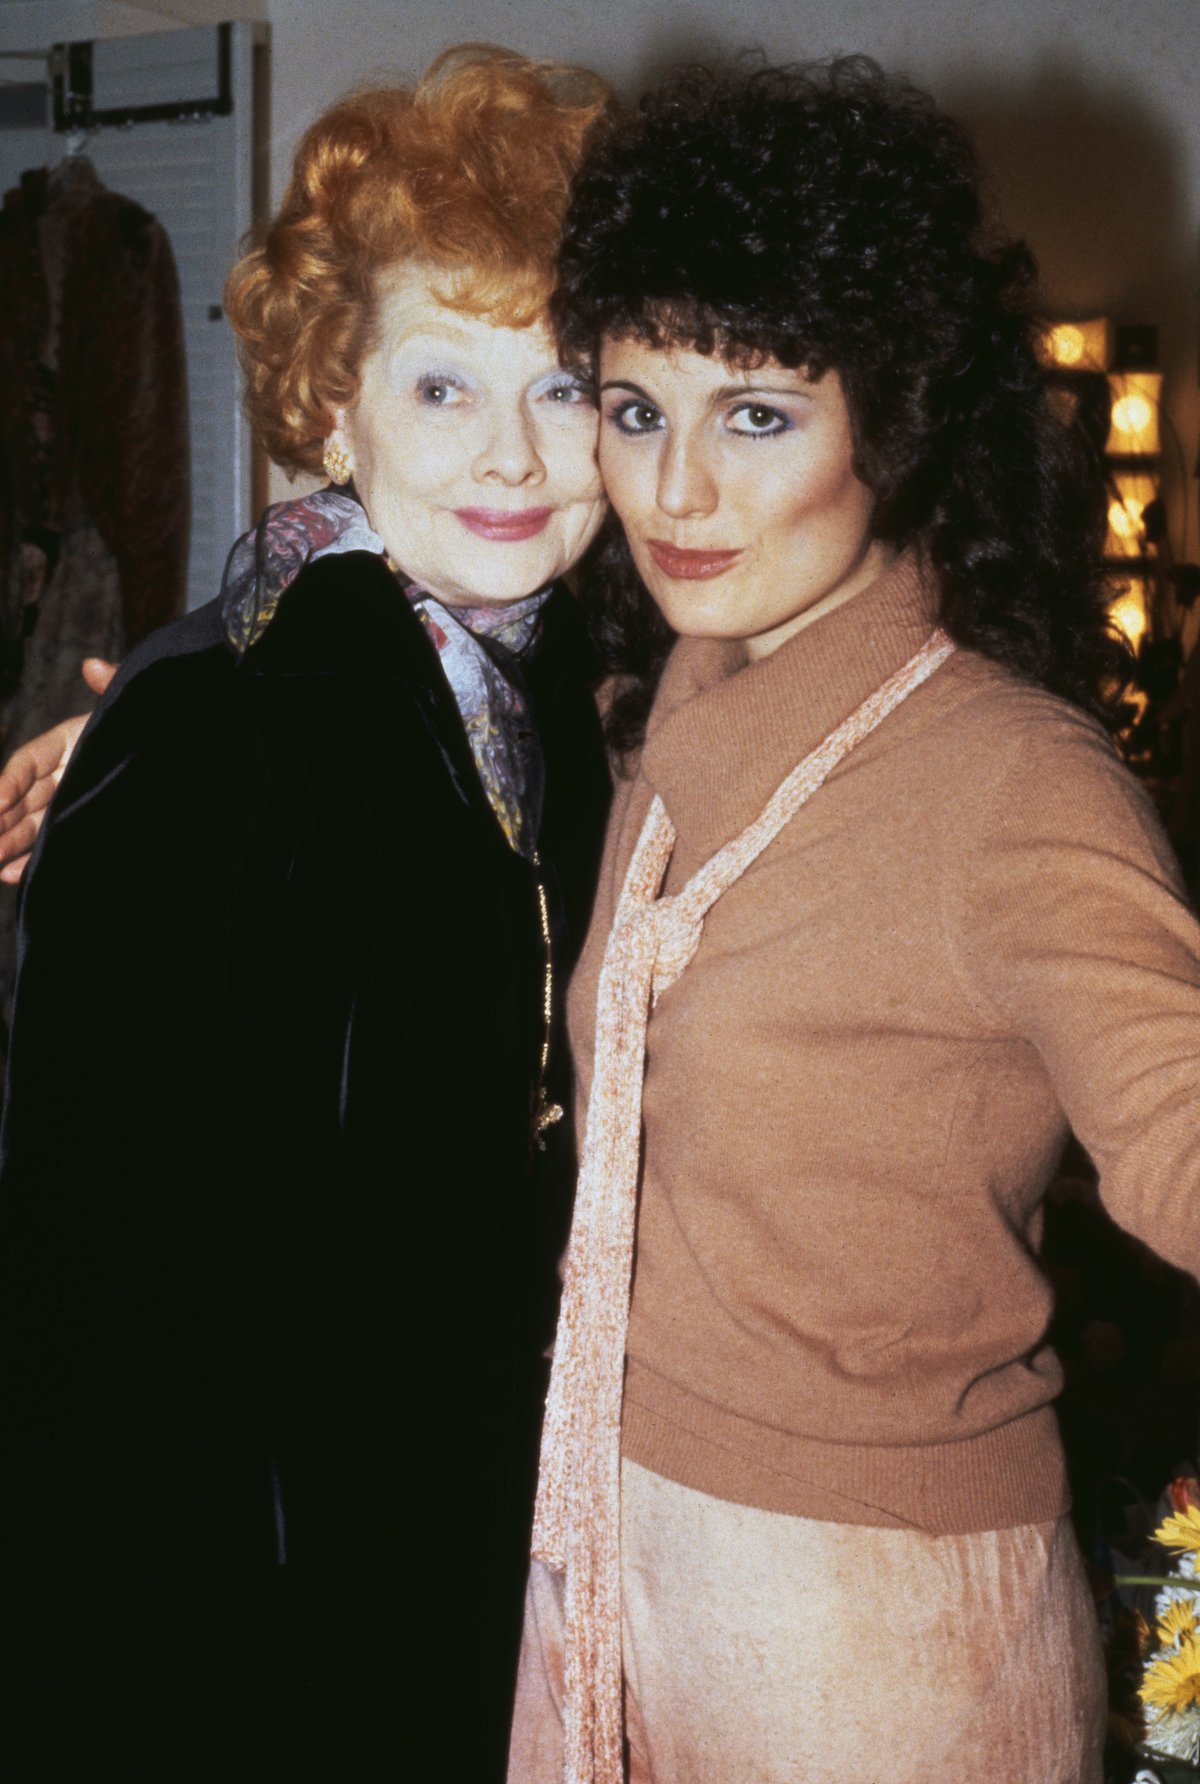 Lucille Ball and Lucie Arnaz out together